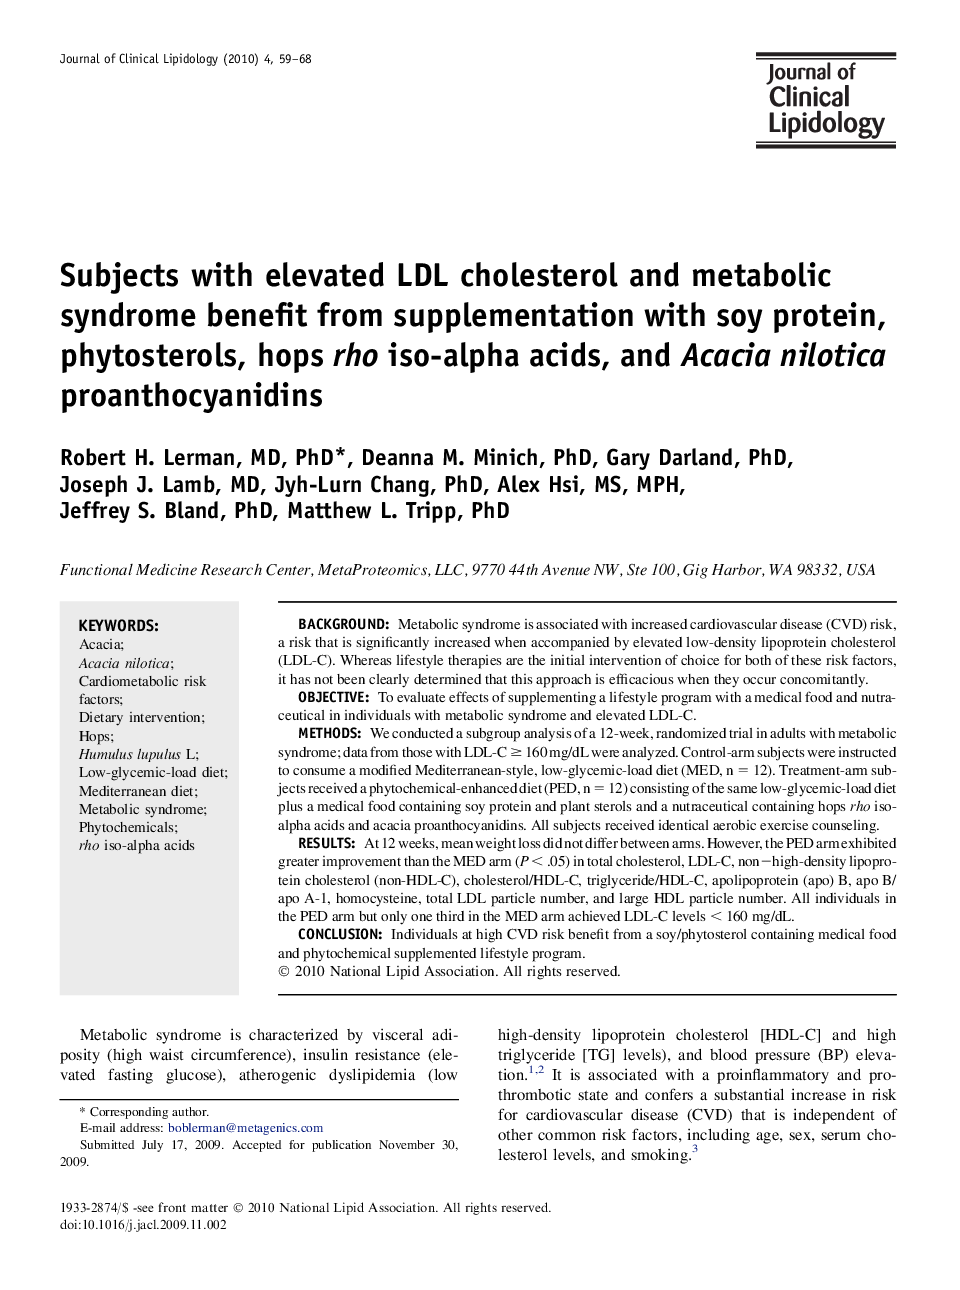 Subjects with elevated LDL cholesterol and metabolic syndrome benefit from supplementation with soy protein, phytosterols, hops rho iso-alpha acids, and Acacia nilotica proanthocyanidins